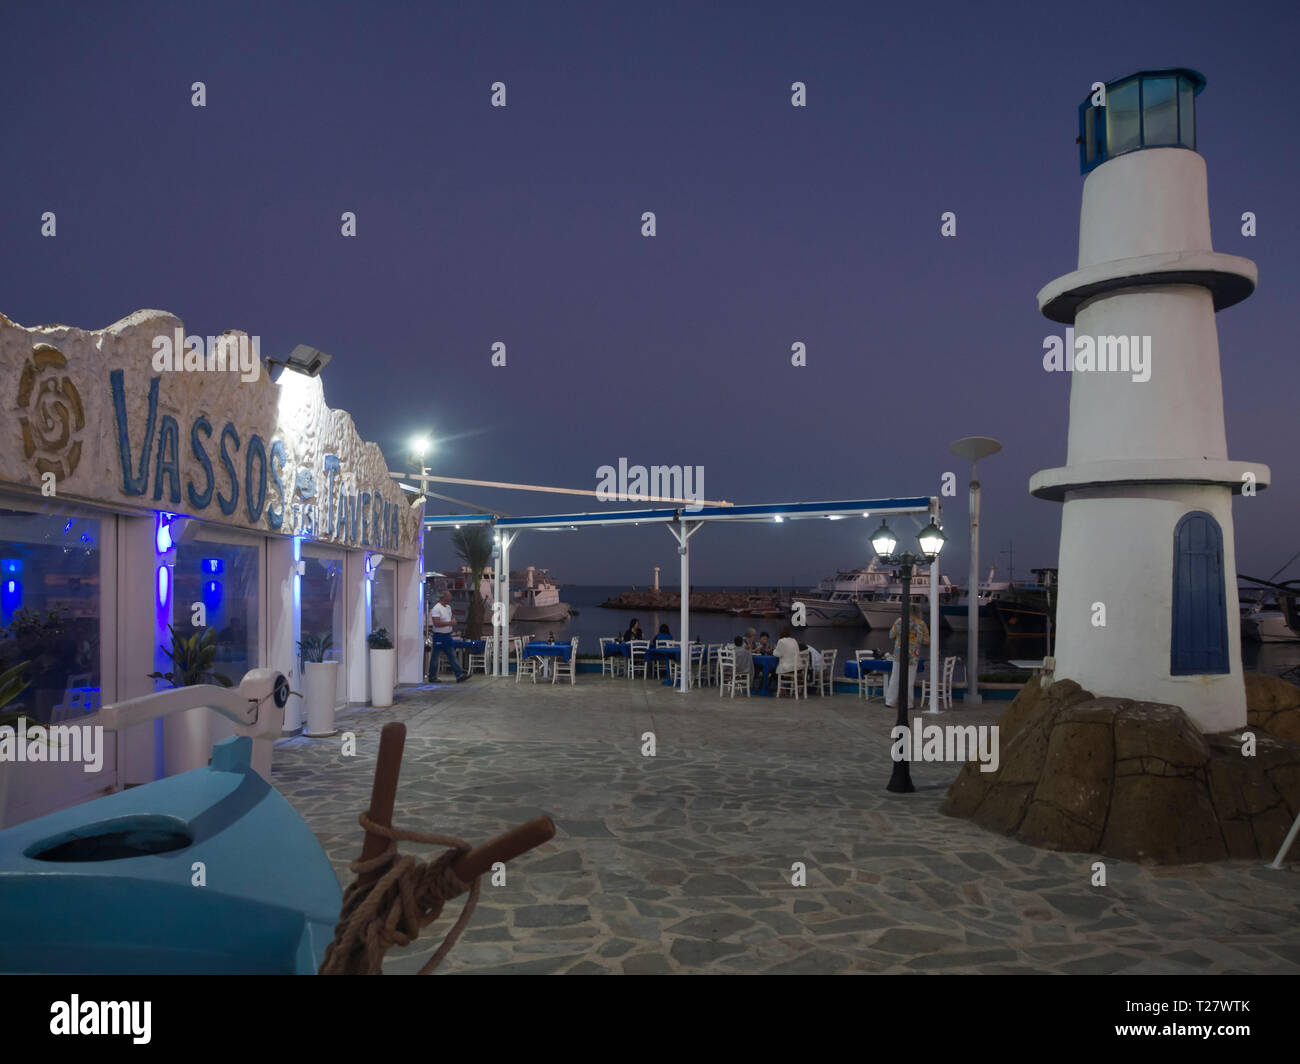 Nighttime in the harbour of Ayia Napa Cyprus, The Vassos restaurant offering outdoor and indoor seating Stock Photo